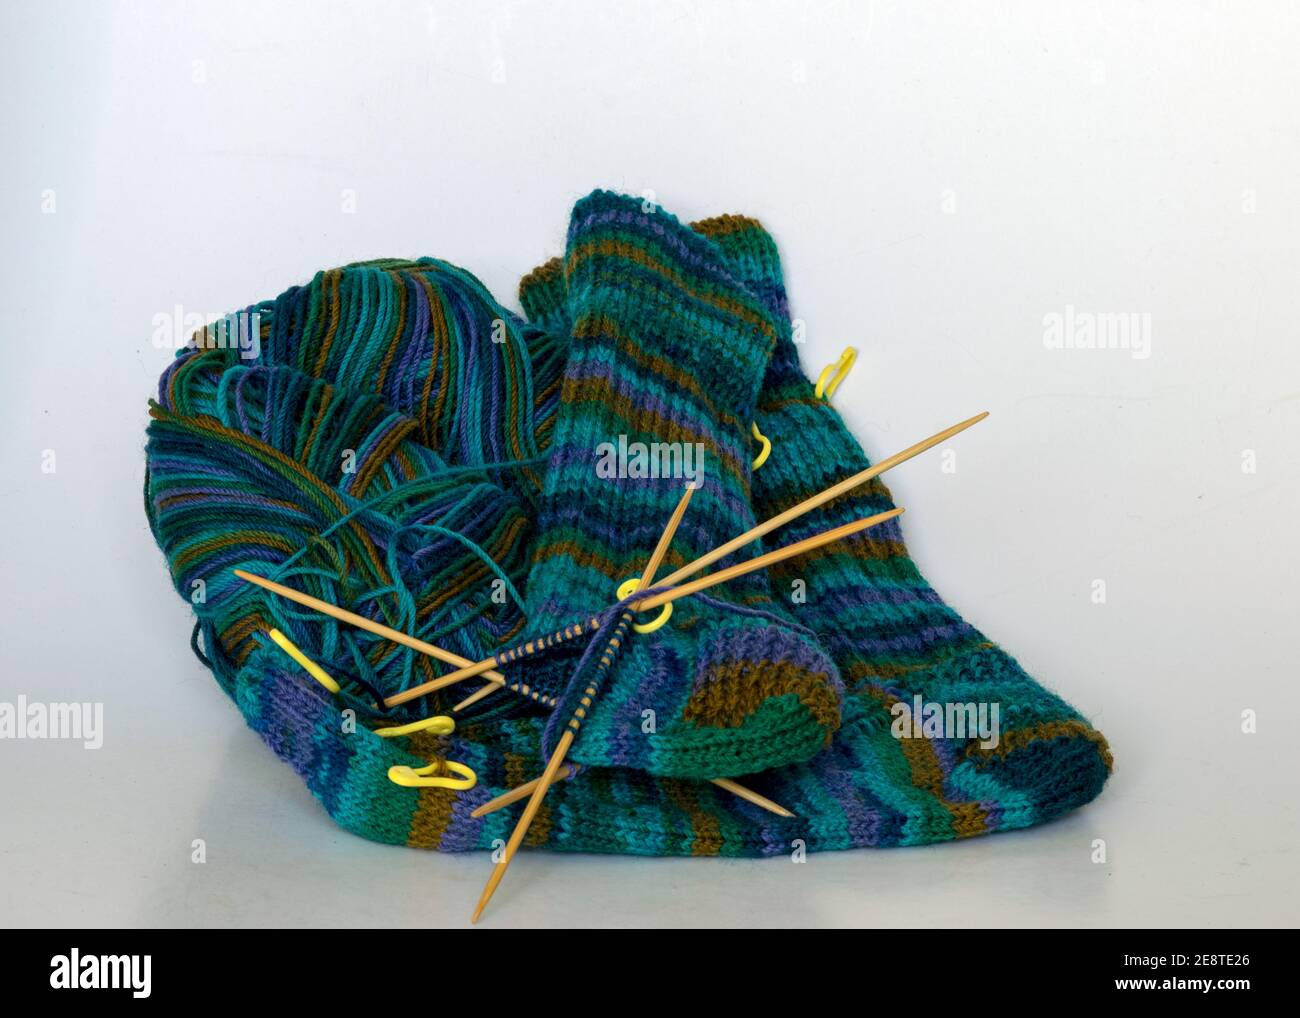 3,800+ Wood Knitting Needles Stock Photos, Pictures & Royalty-Free